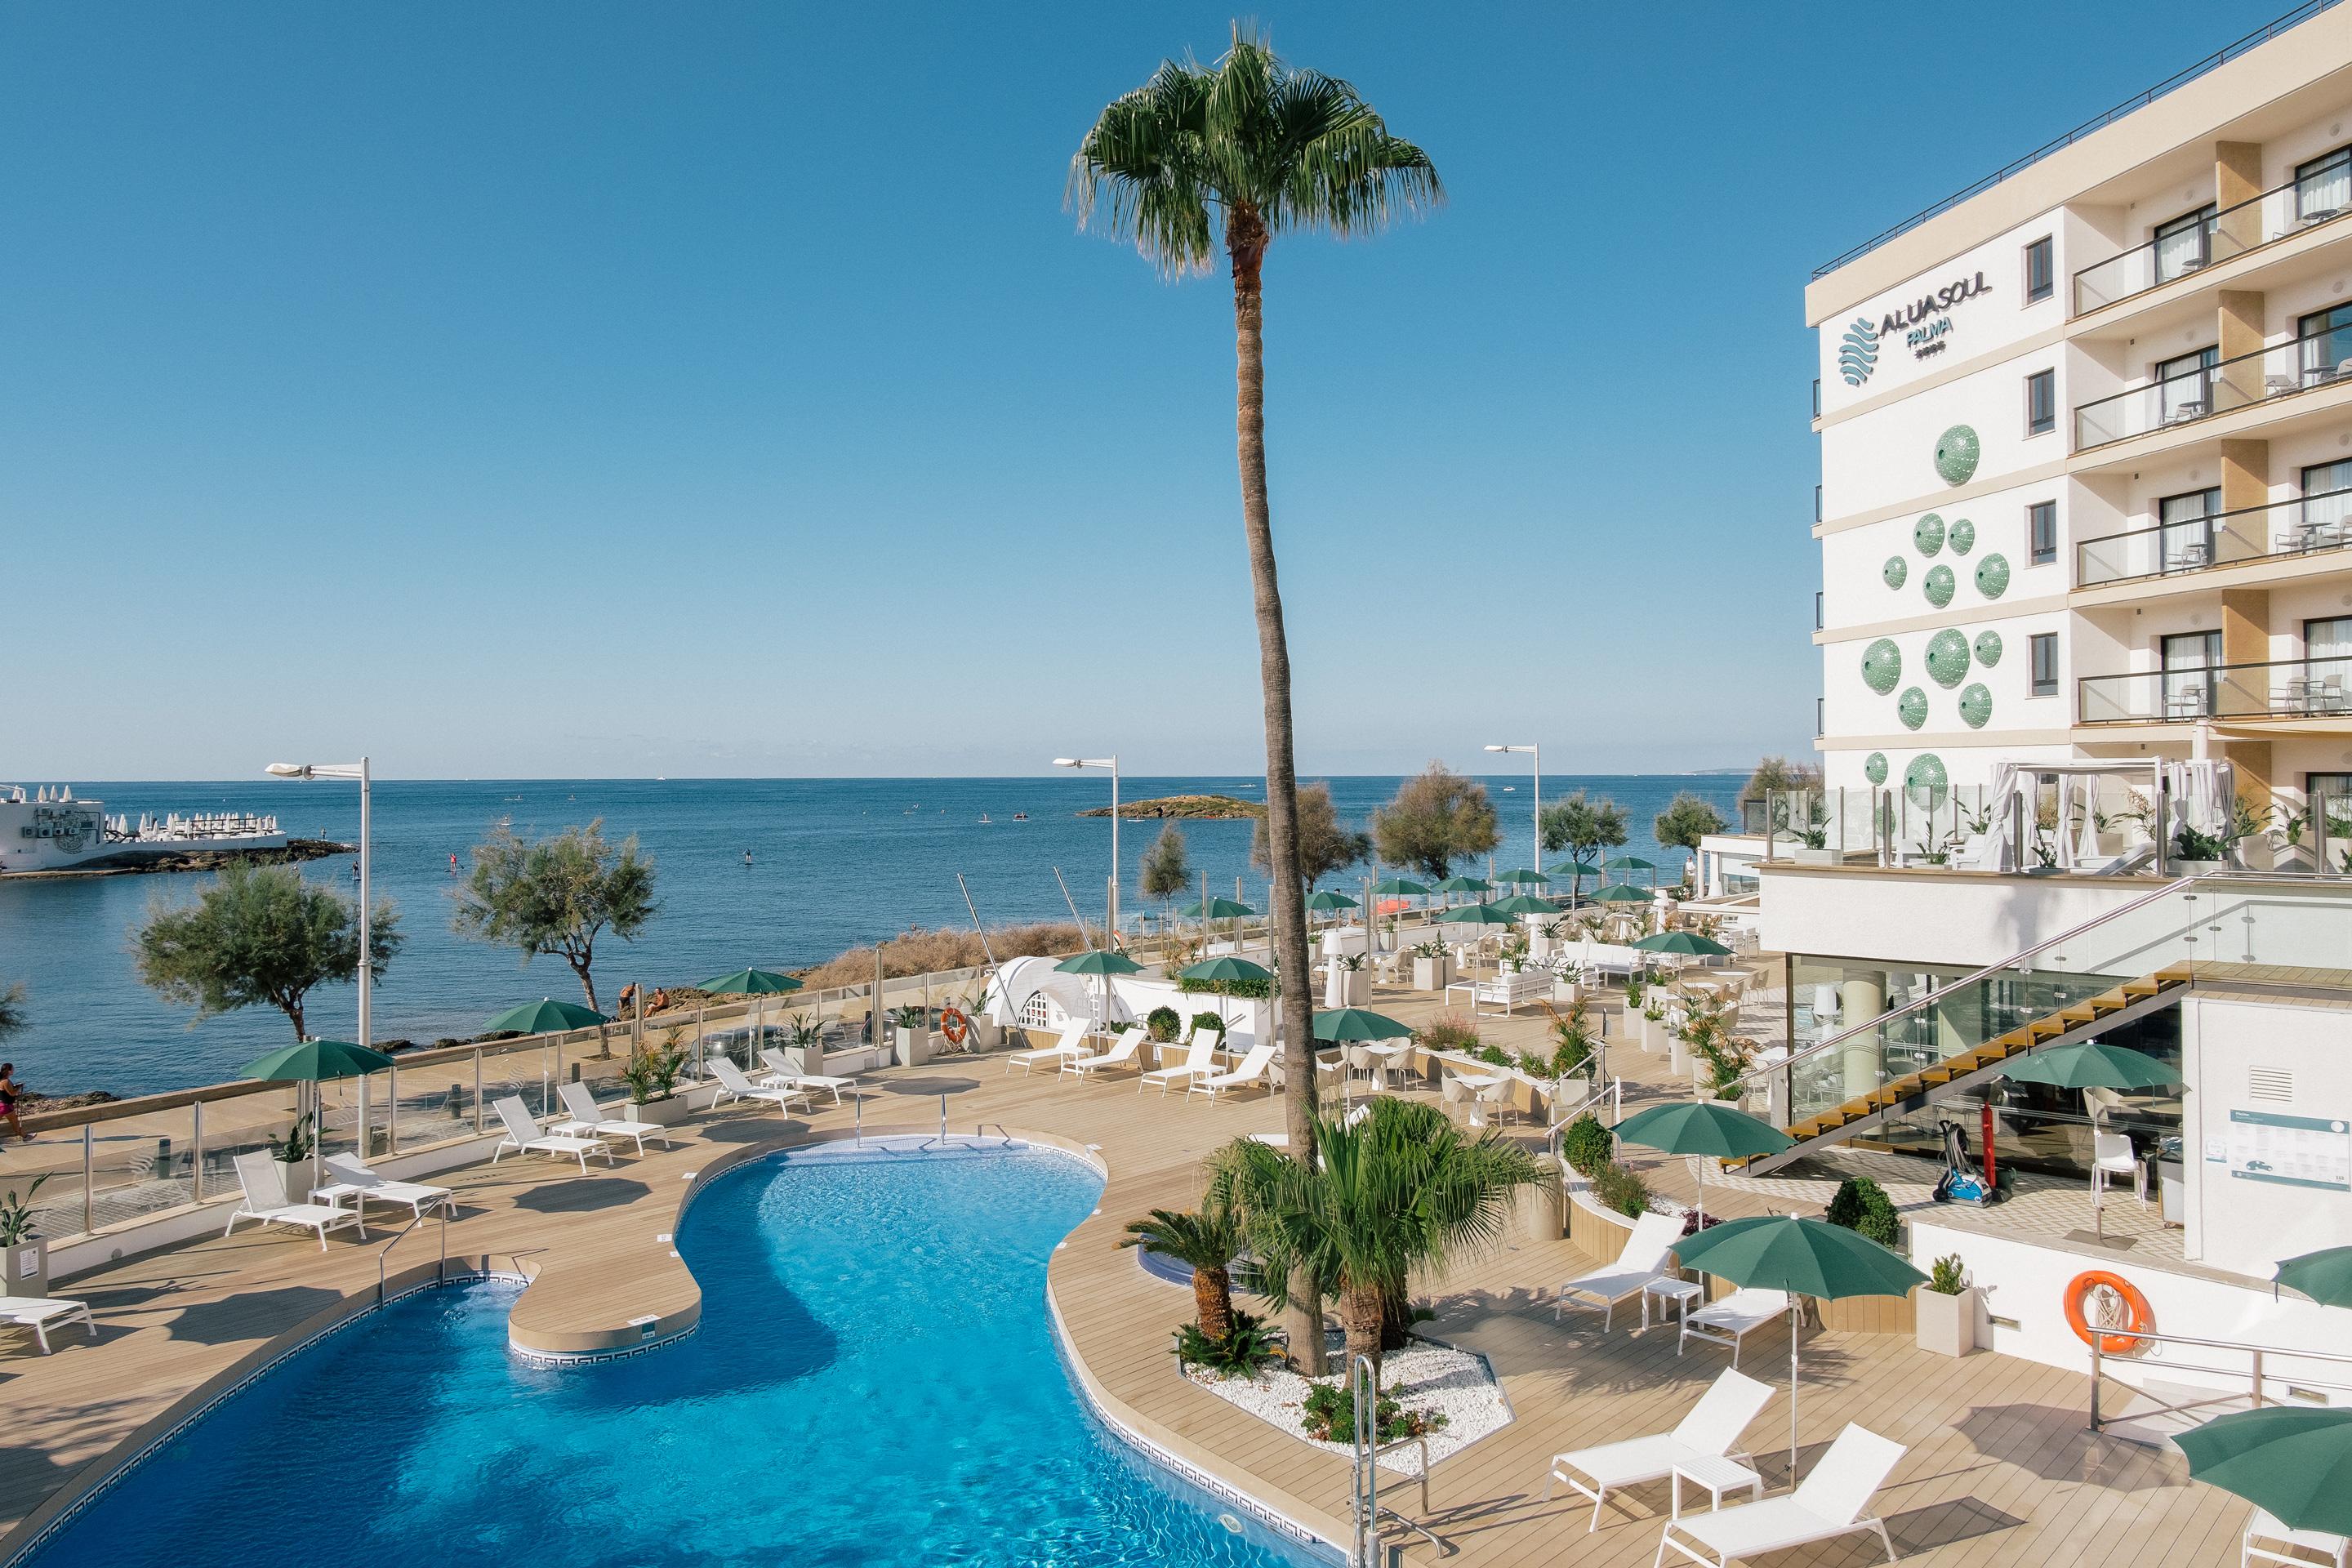 ALUASOUL PALMA HOTEL ADULTS ONLY CAN PASTILLA (MALLORCA) 4* (Spain) - from  £ 77 | HOTELMIX